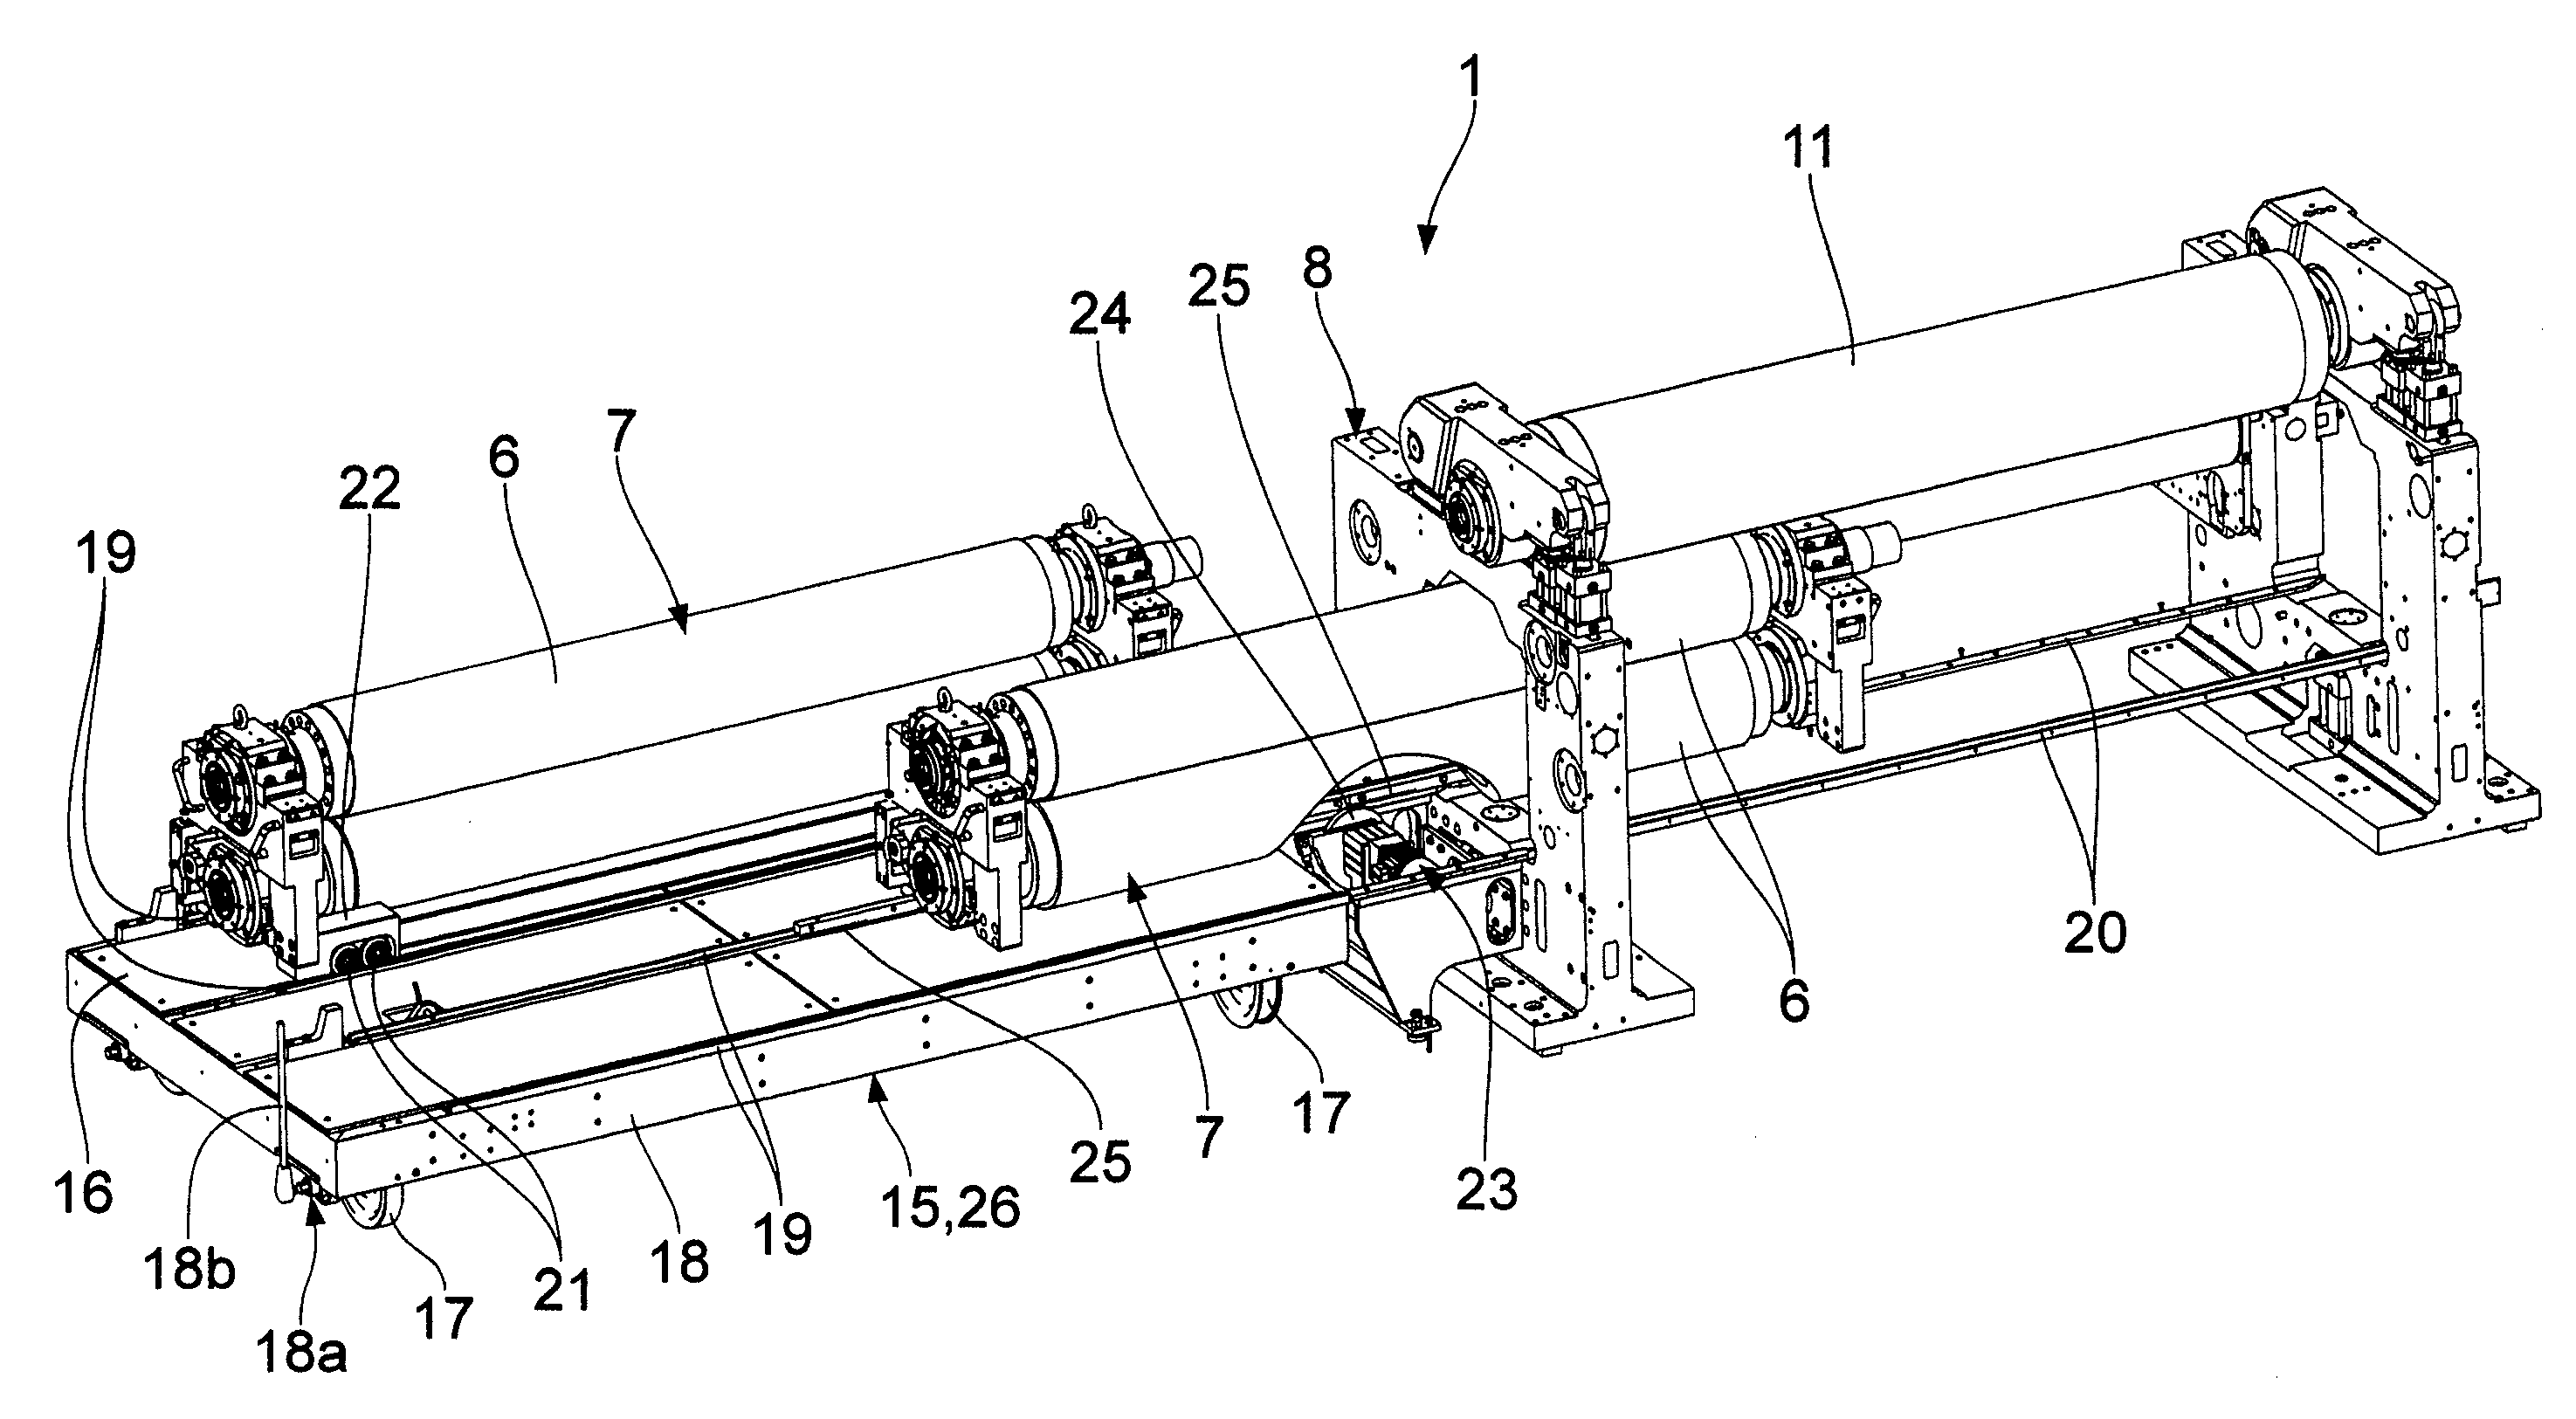 Apparatus for the manufacture of corrugated board